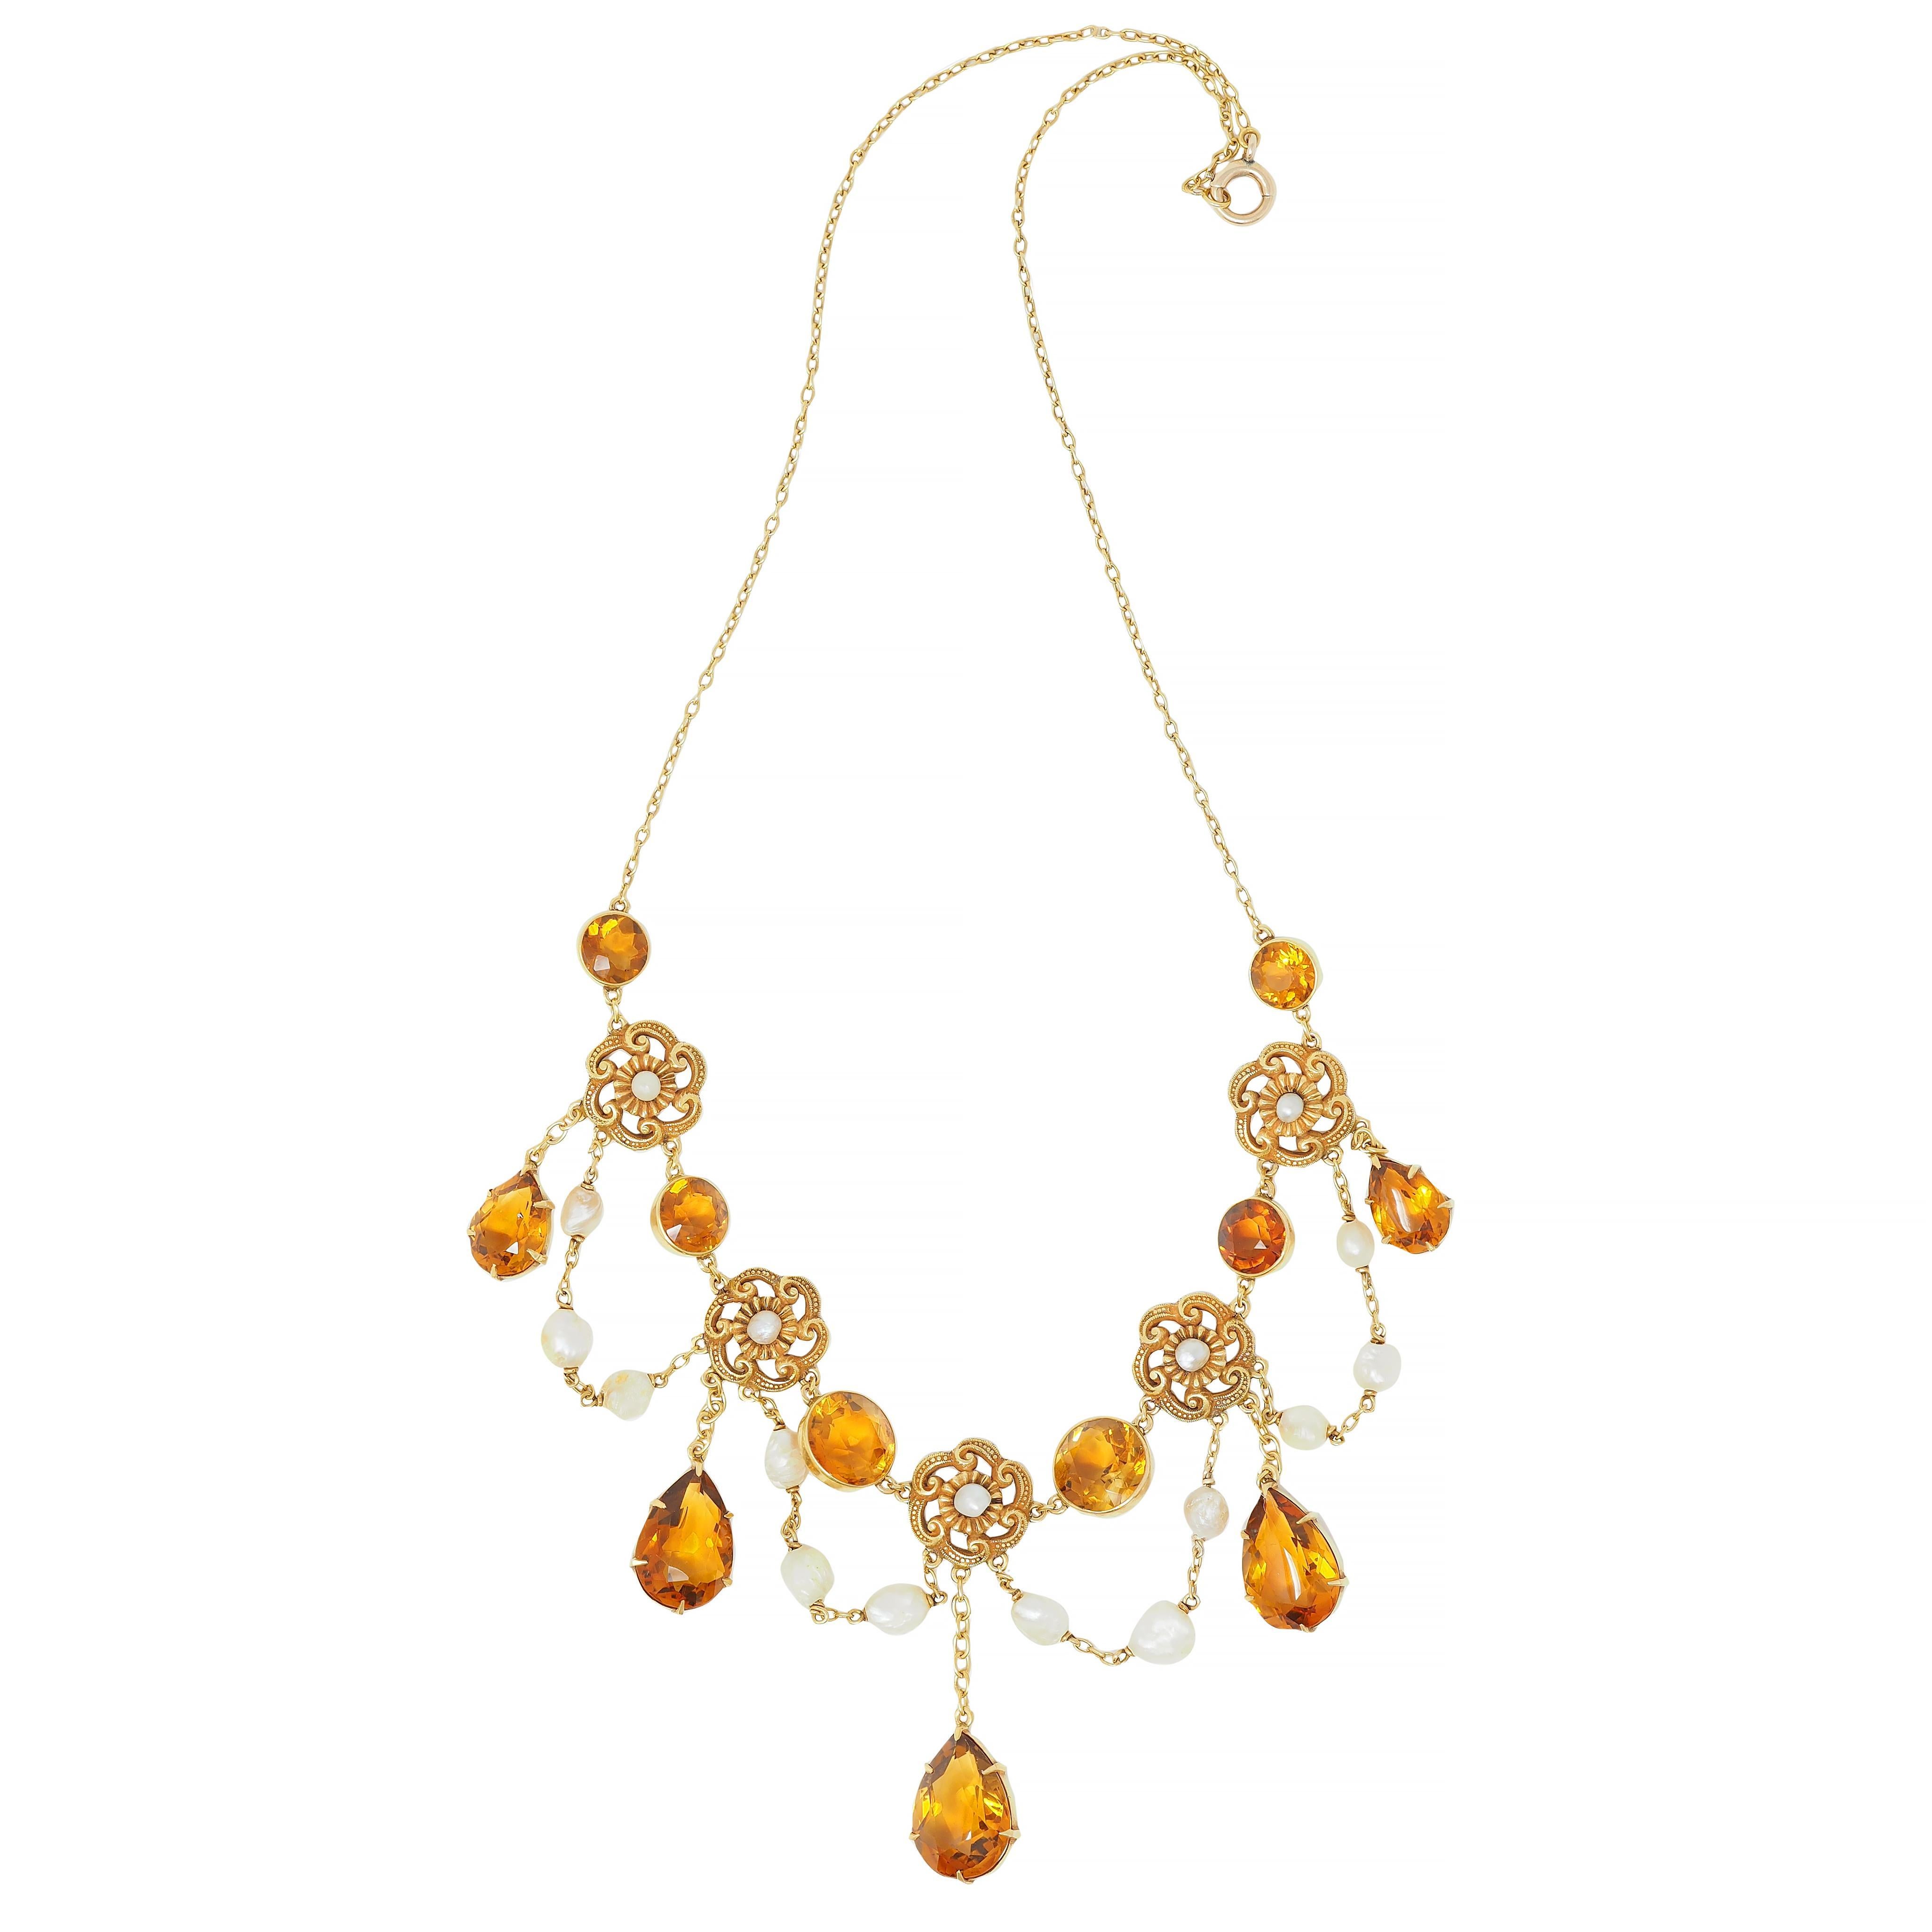 Comprised of cable link chain with a swagged central station with fringe drops
Featuring graduated round cut citrine stations bezel set across 
Weighing approximately 8.52 carats total - transparent medium brownish orange
Alternating with pierced